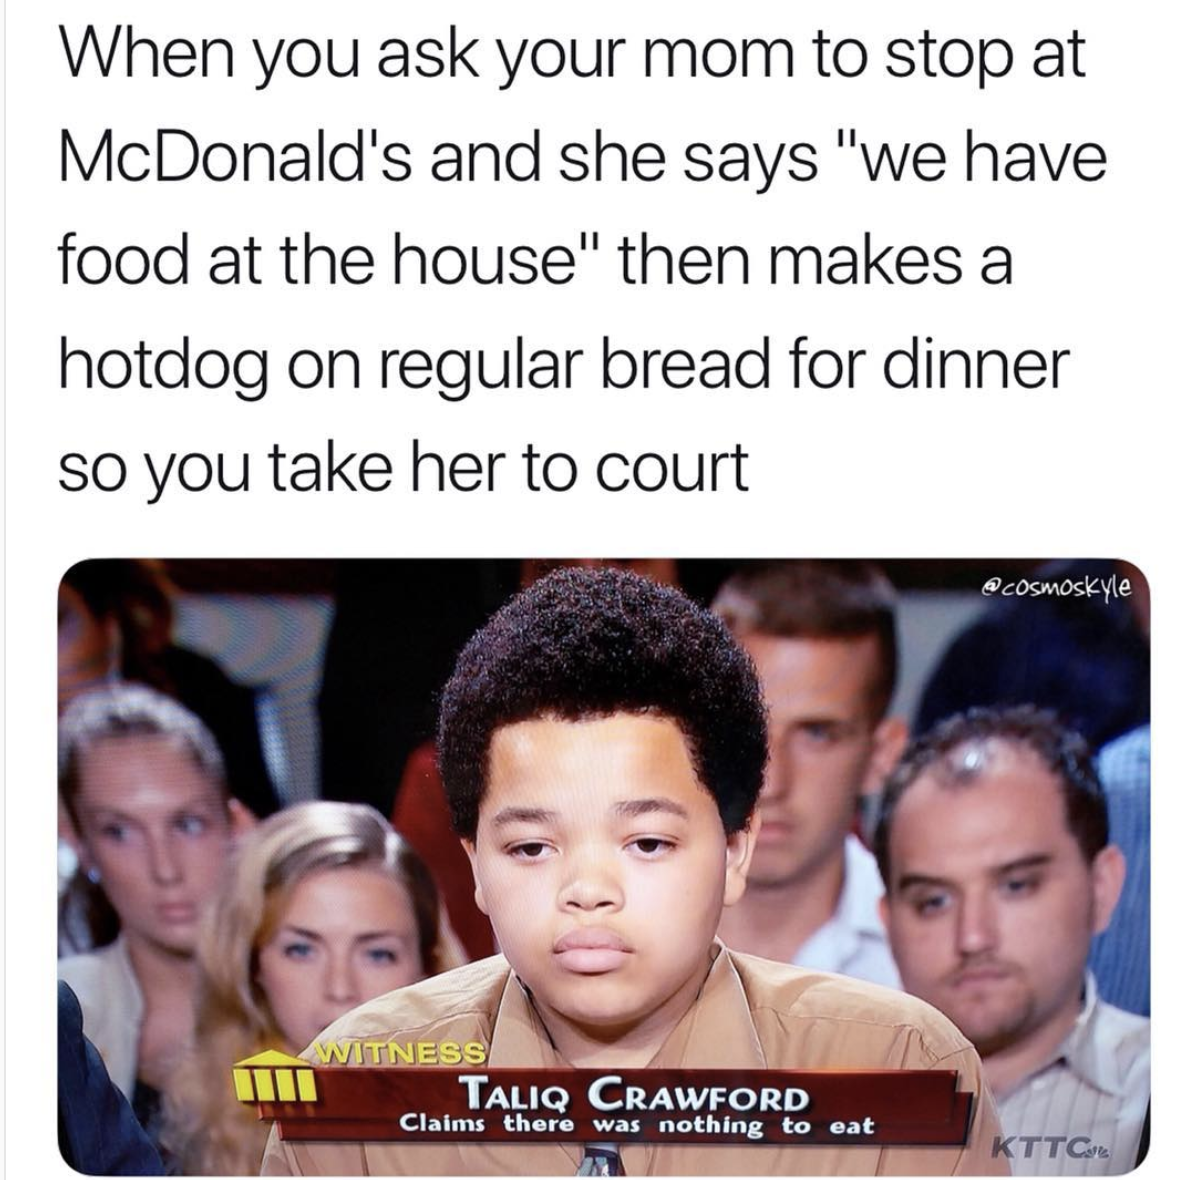 judge judy reddit meme - When you ask your mom to stop at McDonald's and she says "we have food at the house" then makes a hotdog on regular bread for dinner so you take her to court cosmoskyle Witness Taliq Crawford Claims there was nothing to eat